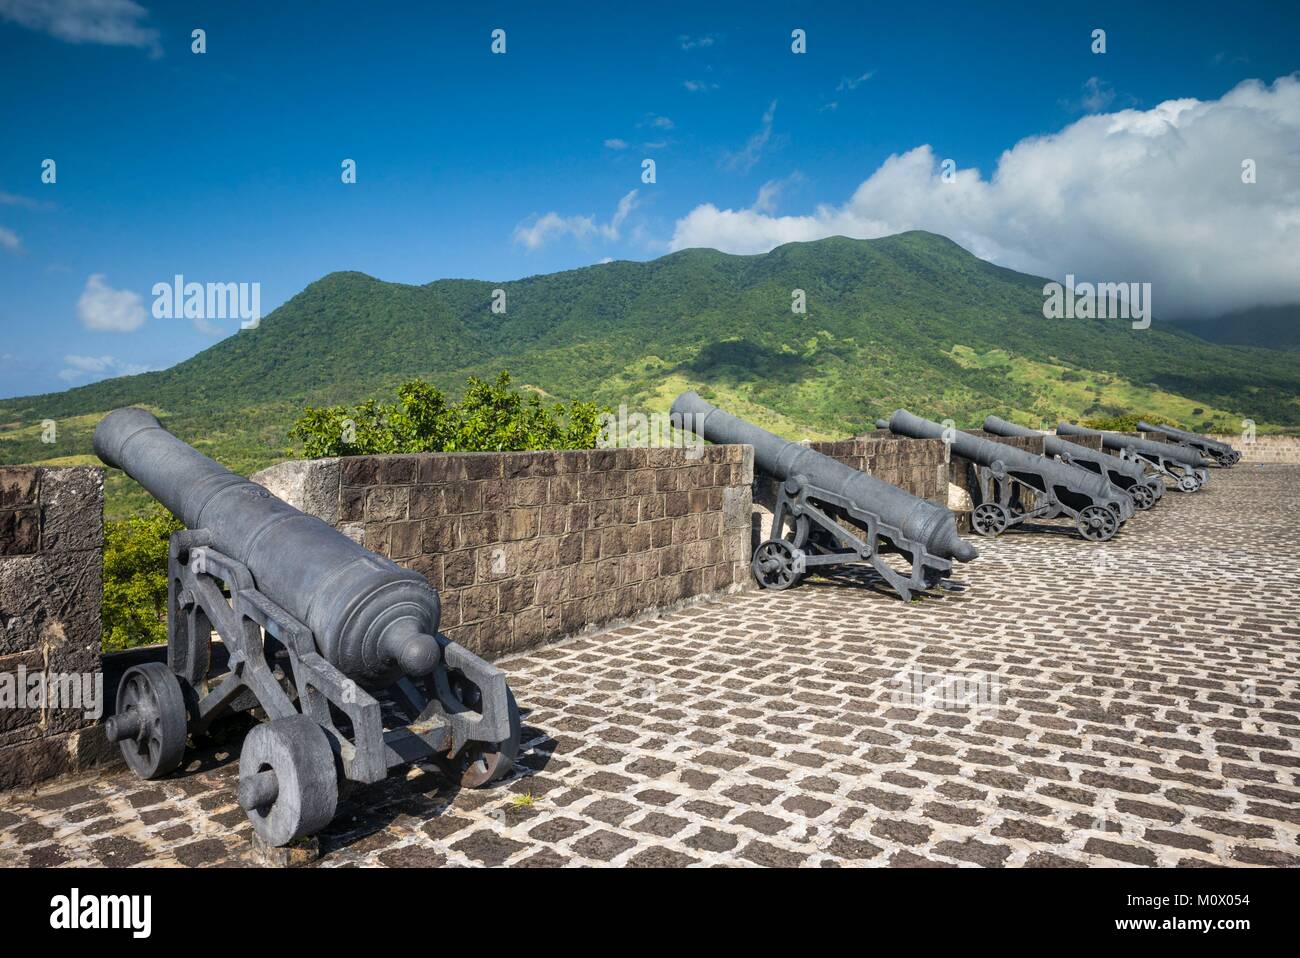 St. Kitts and Nevis,St. Kitts,Brimstone Hill,Brimstone Hill Fortress Stock Photo